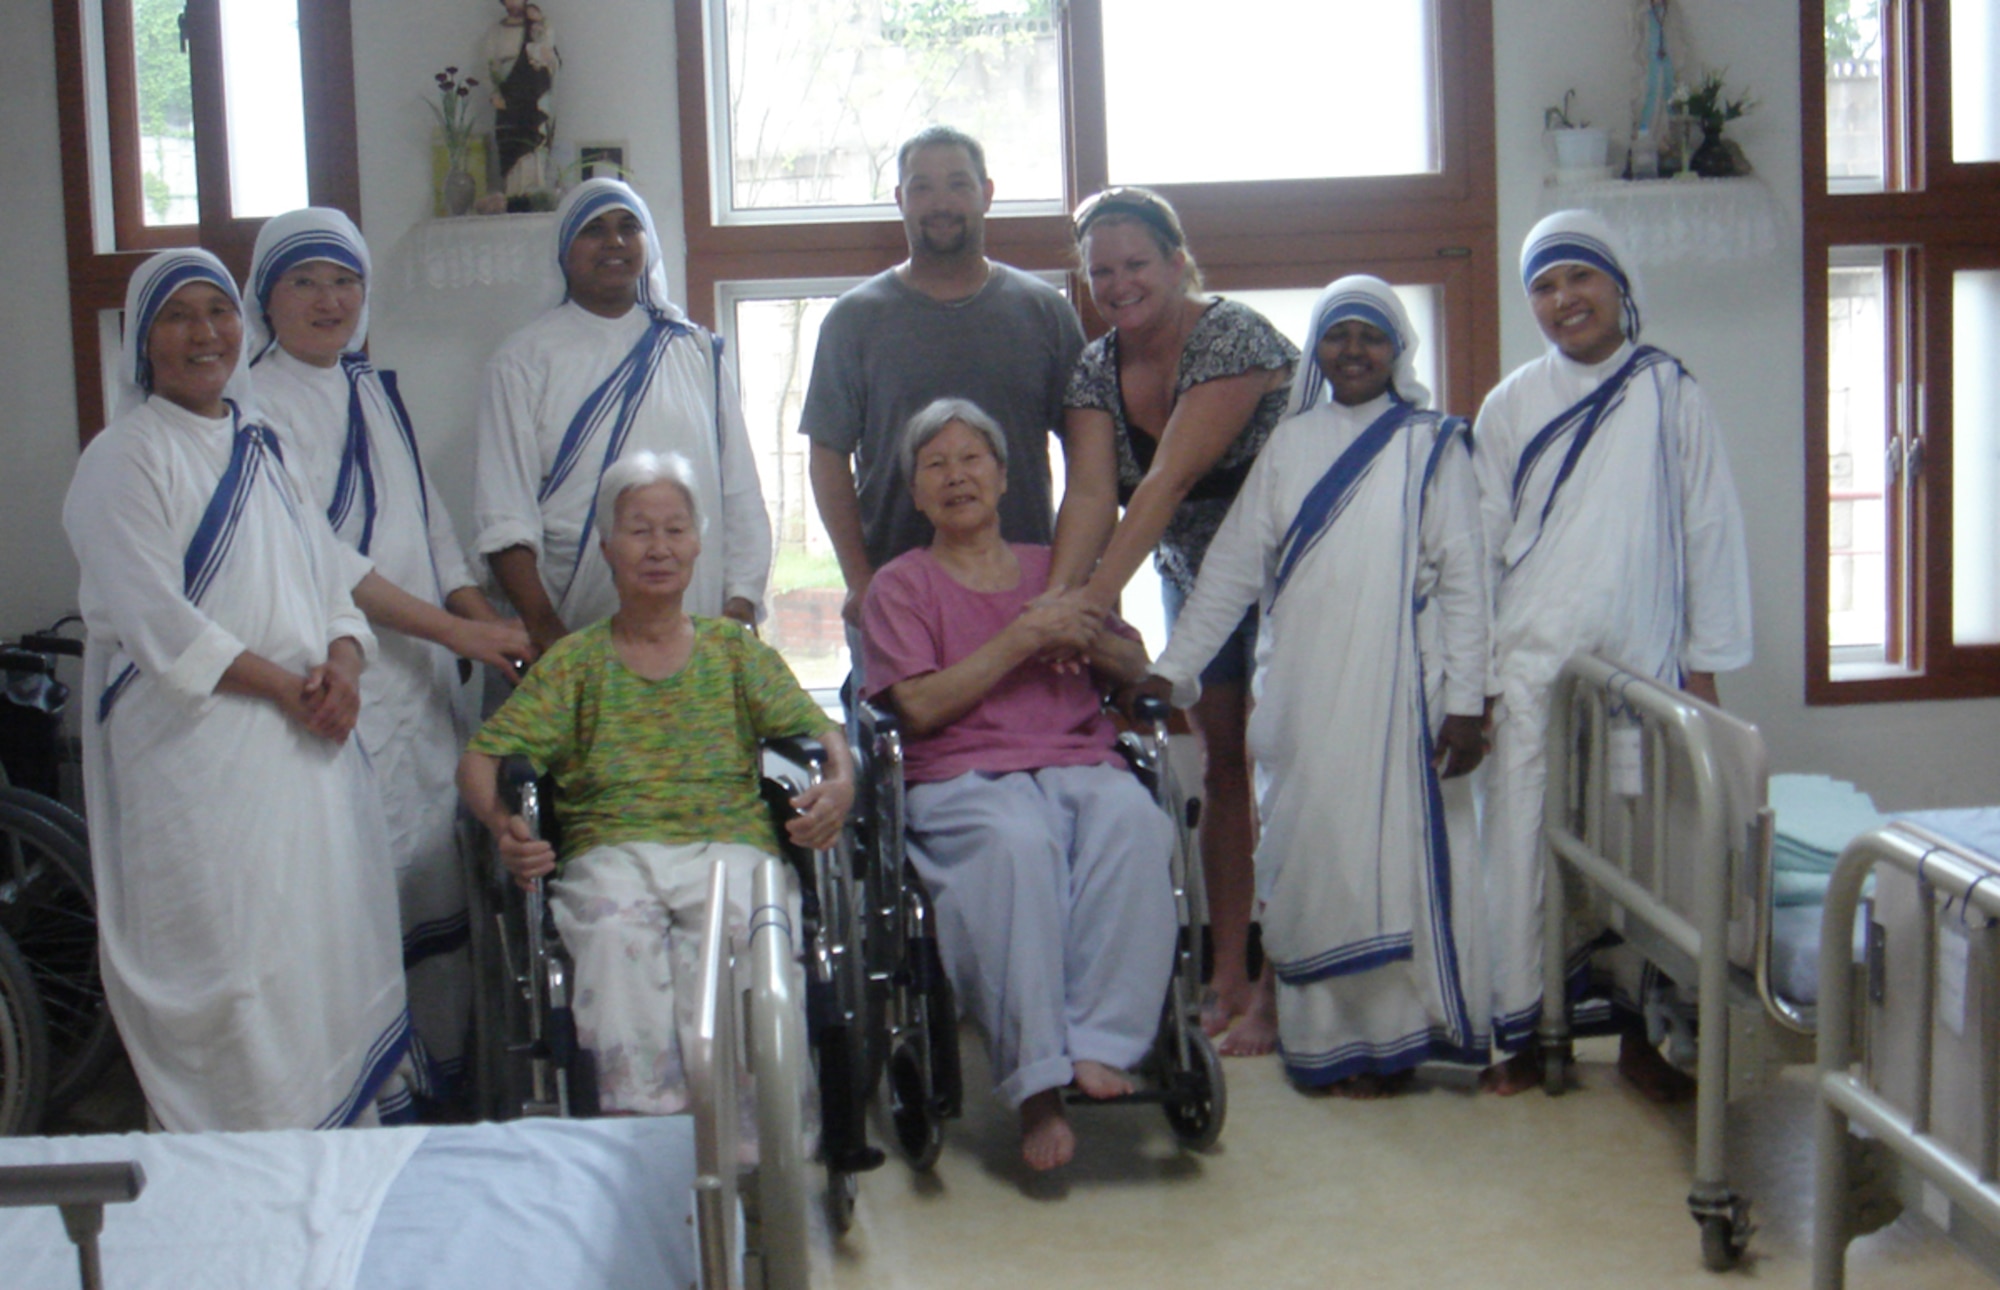 SIN-CHON-DONG, Republic of Korea --  During his mid-tour leave, Tech. Sgt. Shannon Davis visited the Home of the Sacred Heart with his wife Danelle. Here they pose for a picture with the sisters of the Missionaries of Charity and some of the women who stay at the mission. (Courtesy photo)